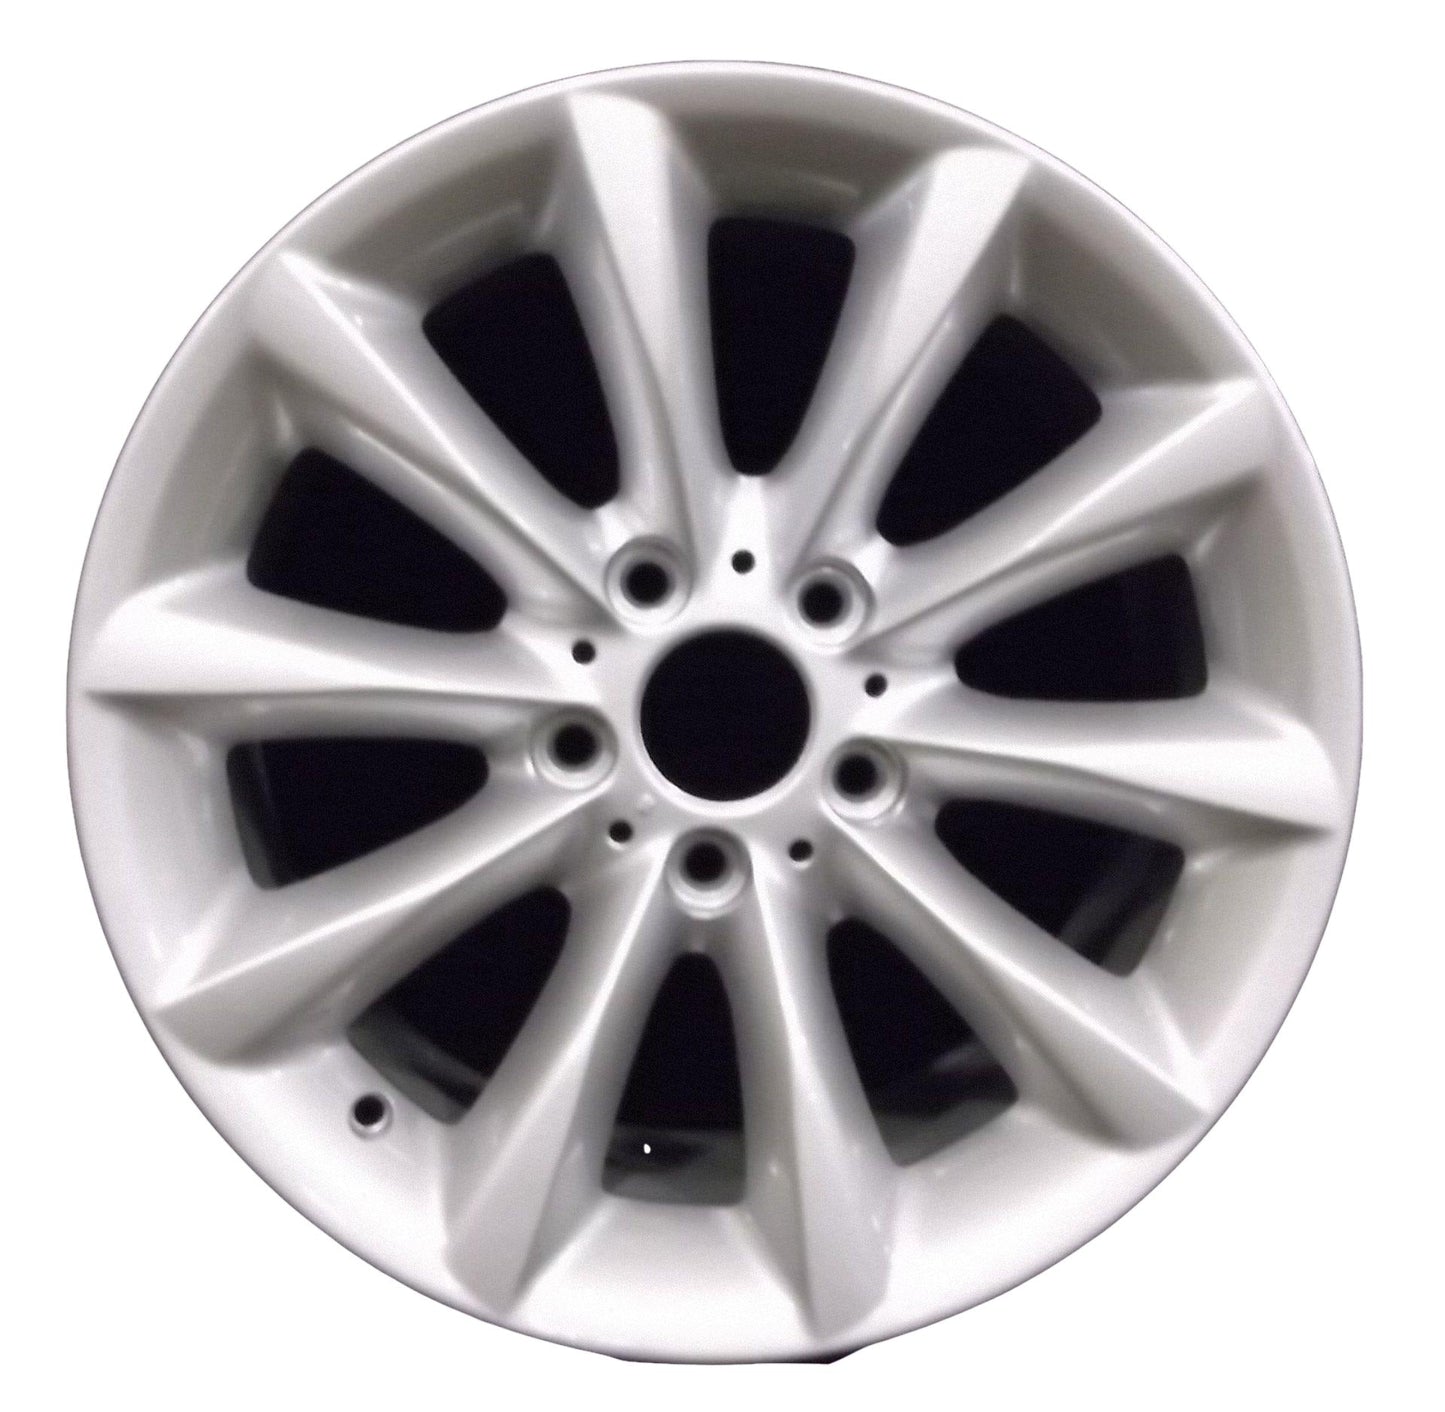 BMW 328i  2008, 2009, 2010, 2011, 2012, 2013 Factory OEM Car Wheel Size 17x8 Alloy WAO.71454FT.PS15.FF